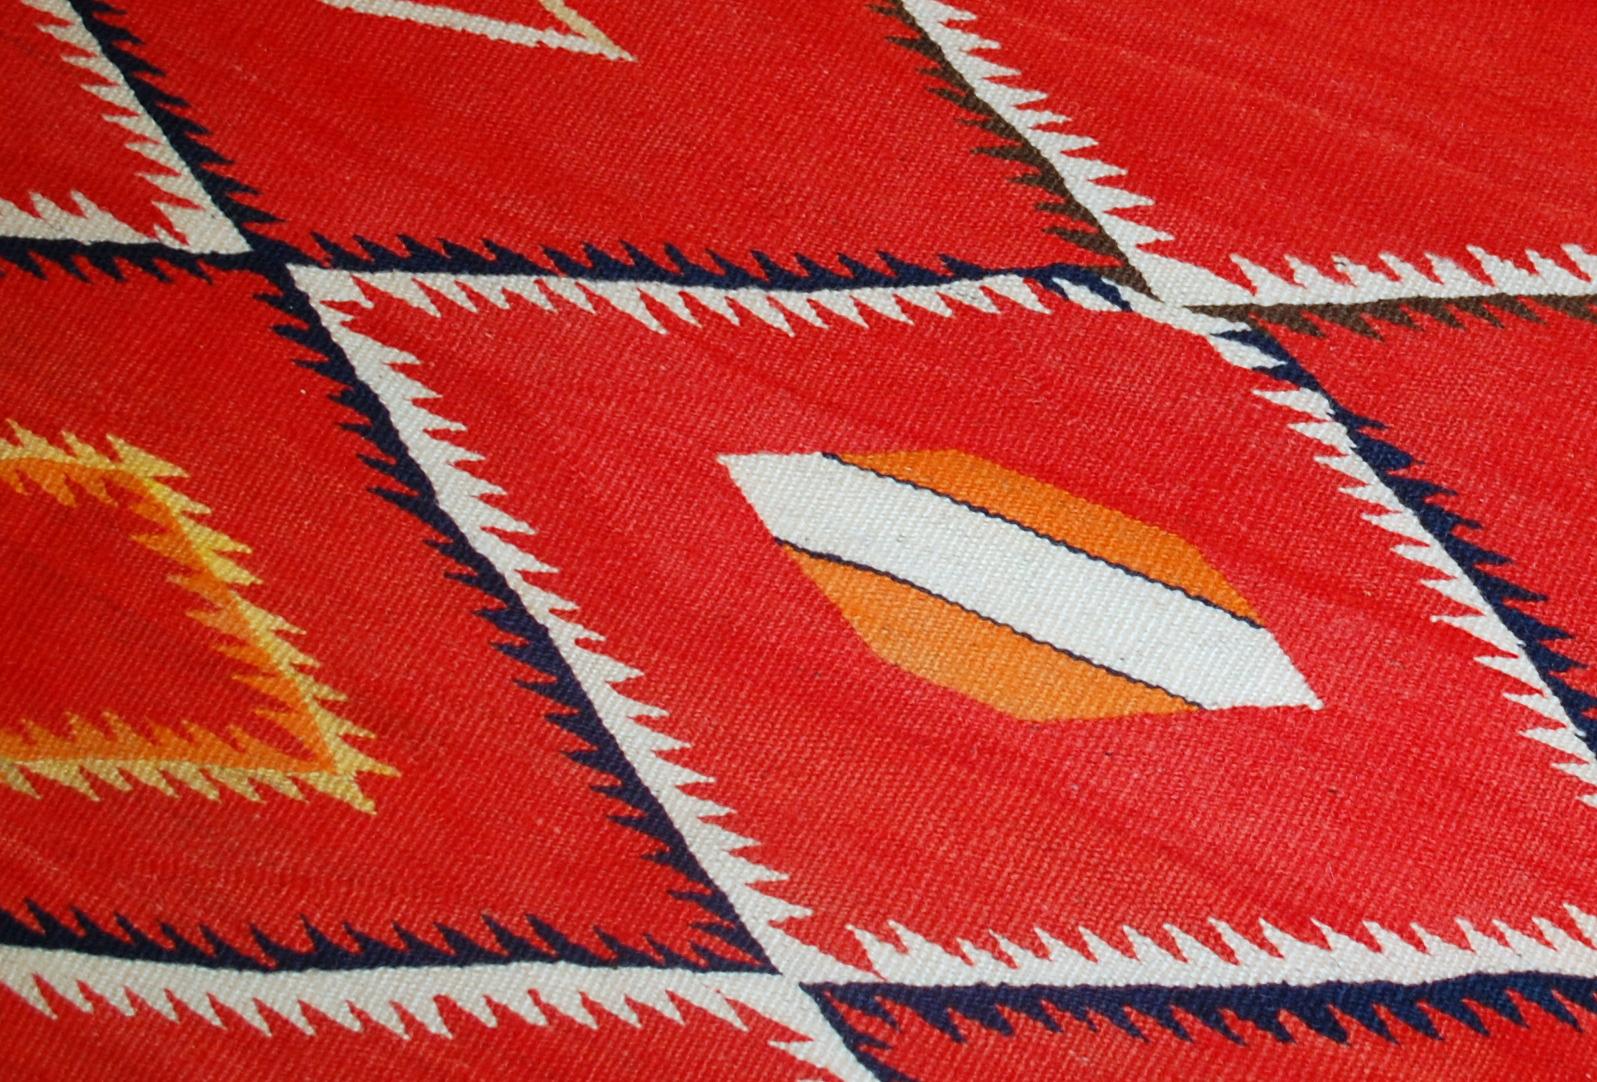 Antique hand-woven American-Indian Navajo blanket in original great condition. The blanket has been made in the end of 19th century in bright red shade. Repeating diamonds in white and indigo shades are decorating it. Smaller inner diamonds are in